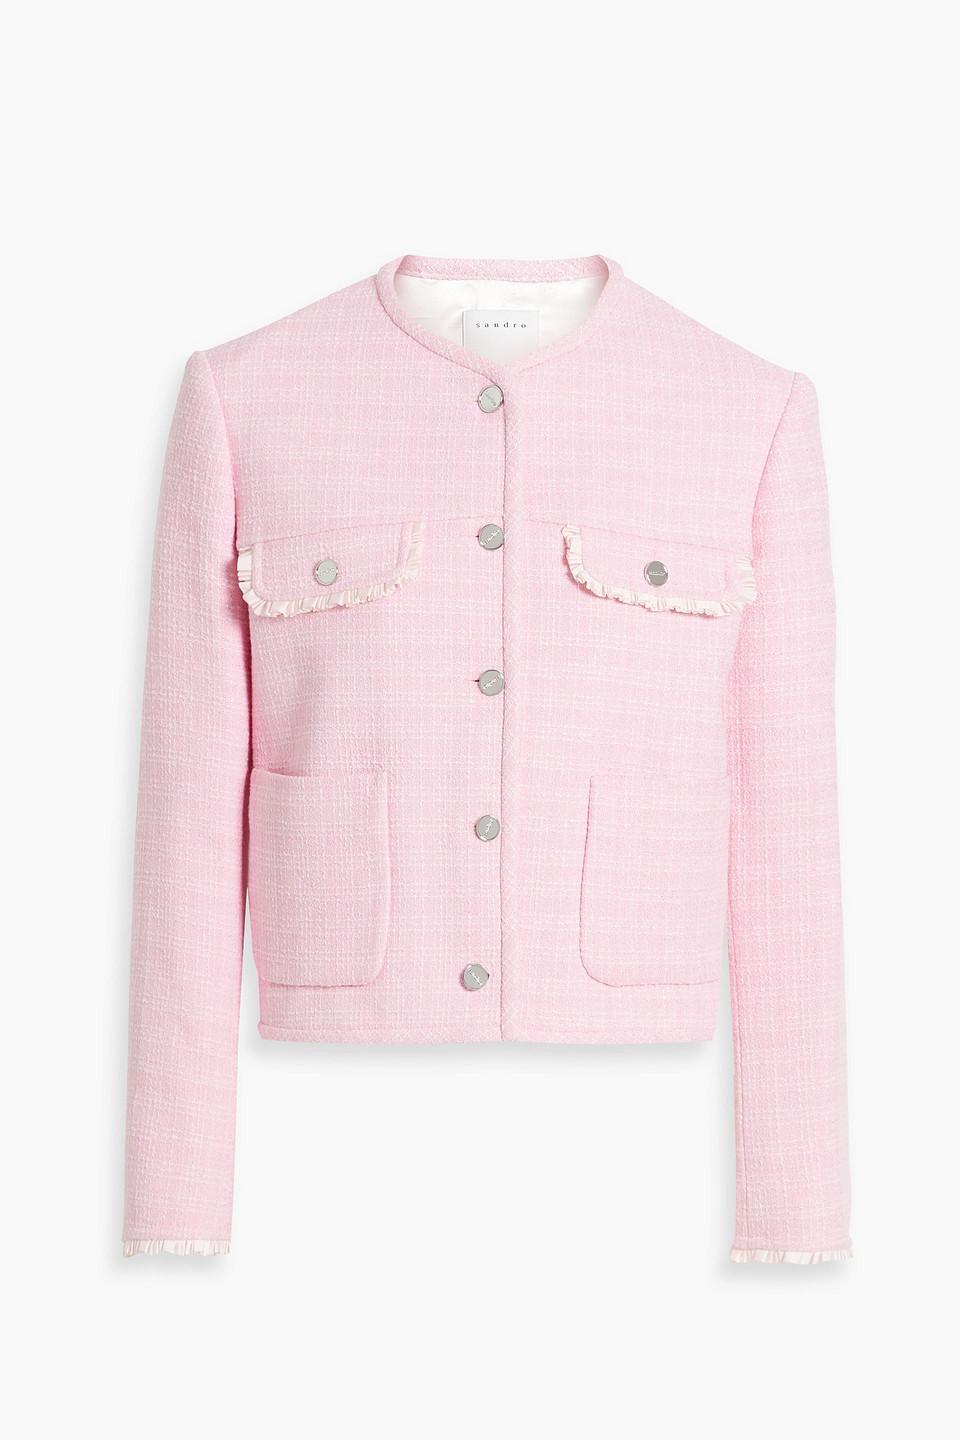 Sandro Ruffle-trimmed Tweed Jacket in Pink | Lyst